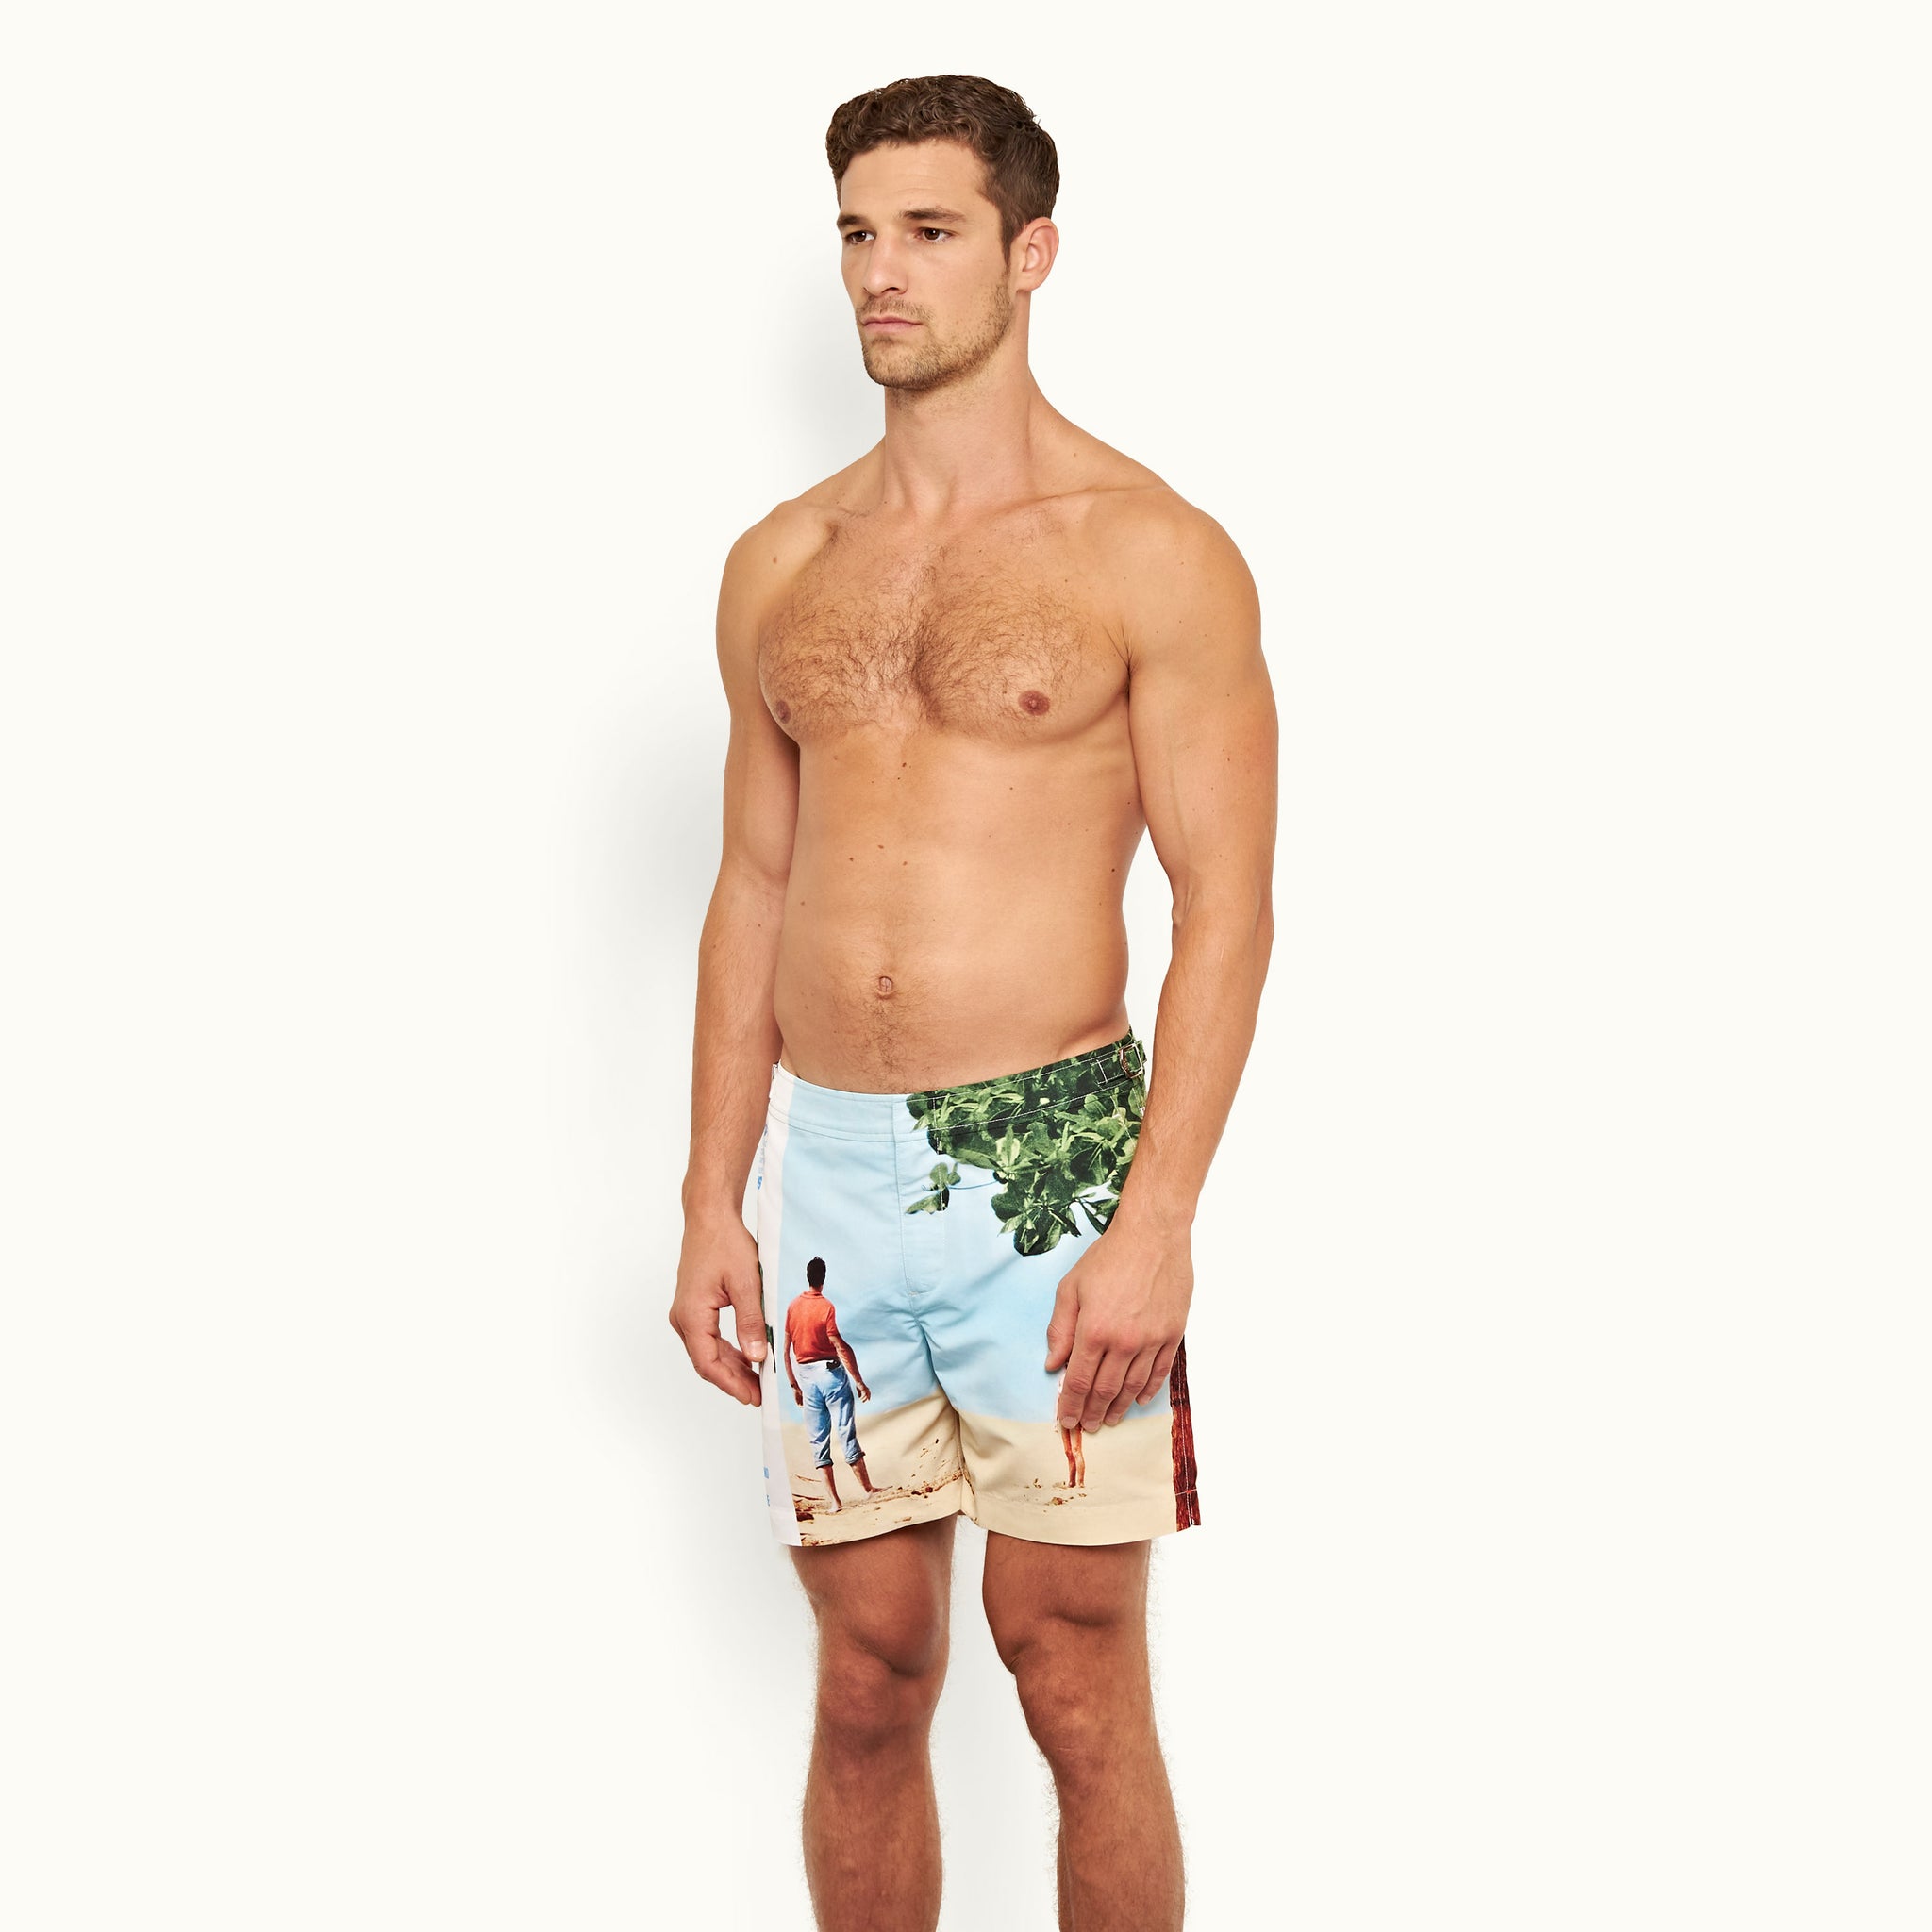 James Bond Dr. No Poster Swim Shorts By Orlebar Brown | 007Store